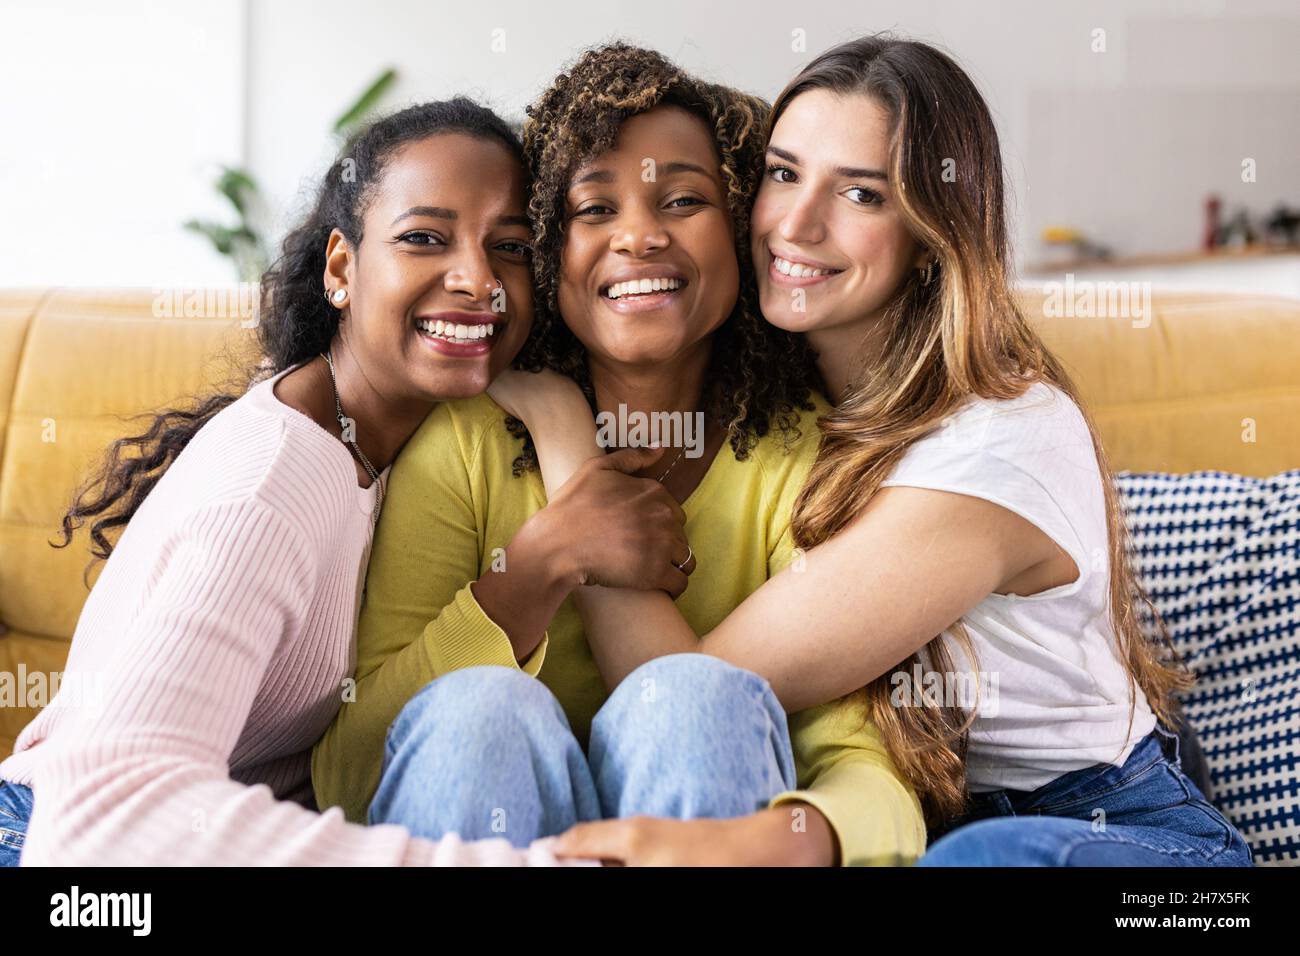 Three united beautiful smiling women sitting together on couch Stock Photo